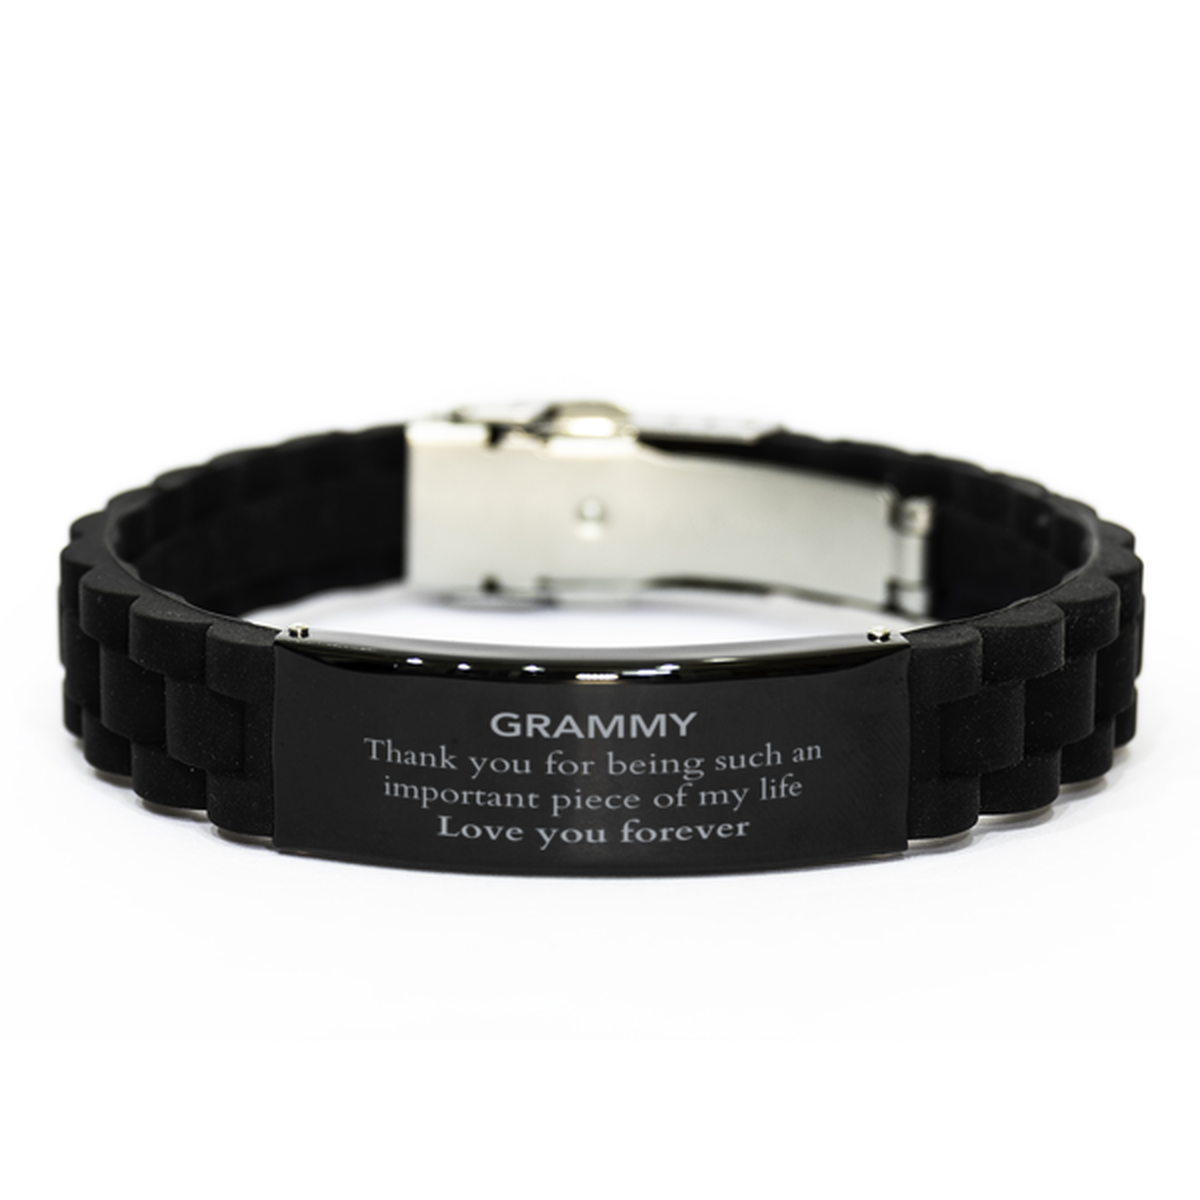 Appropriate Grammy Black Glidelock Clasp Bracelet Epic Birthday Gifts for Grammy Thank you for being such an important piece of my life Grammy Christmas Mothers Fathers Day